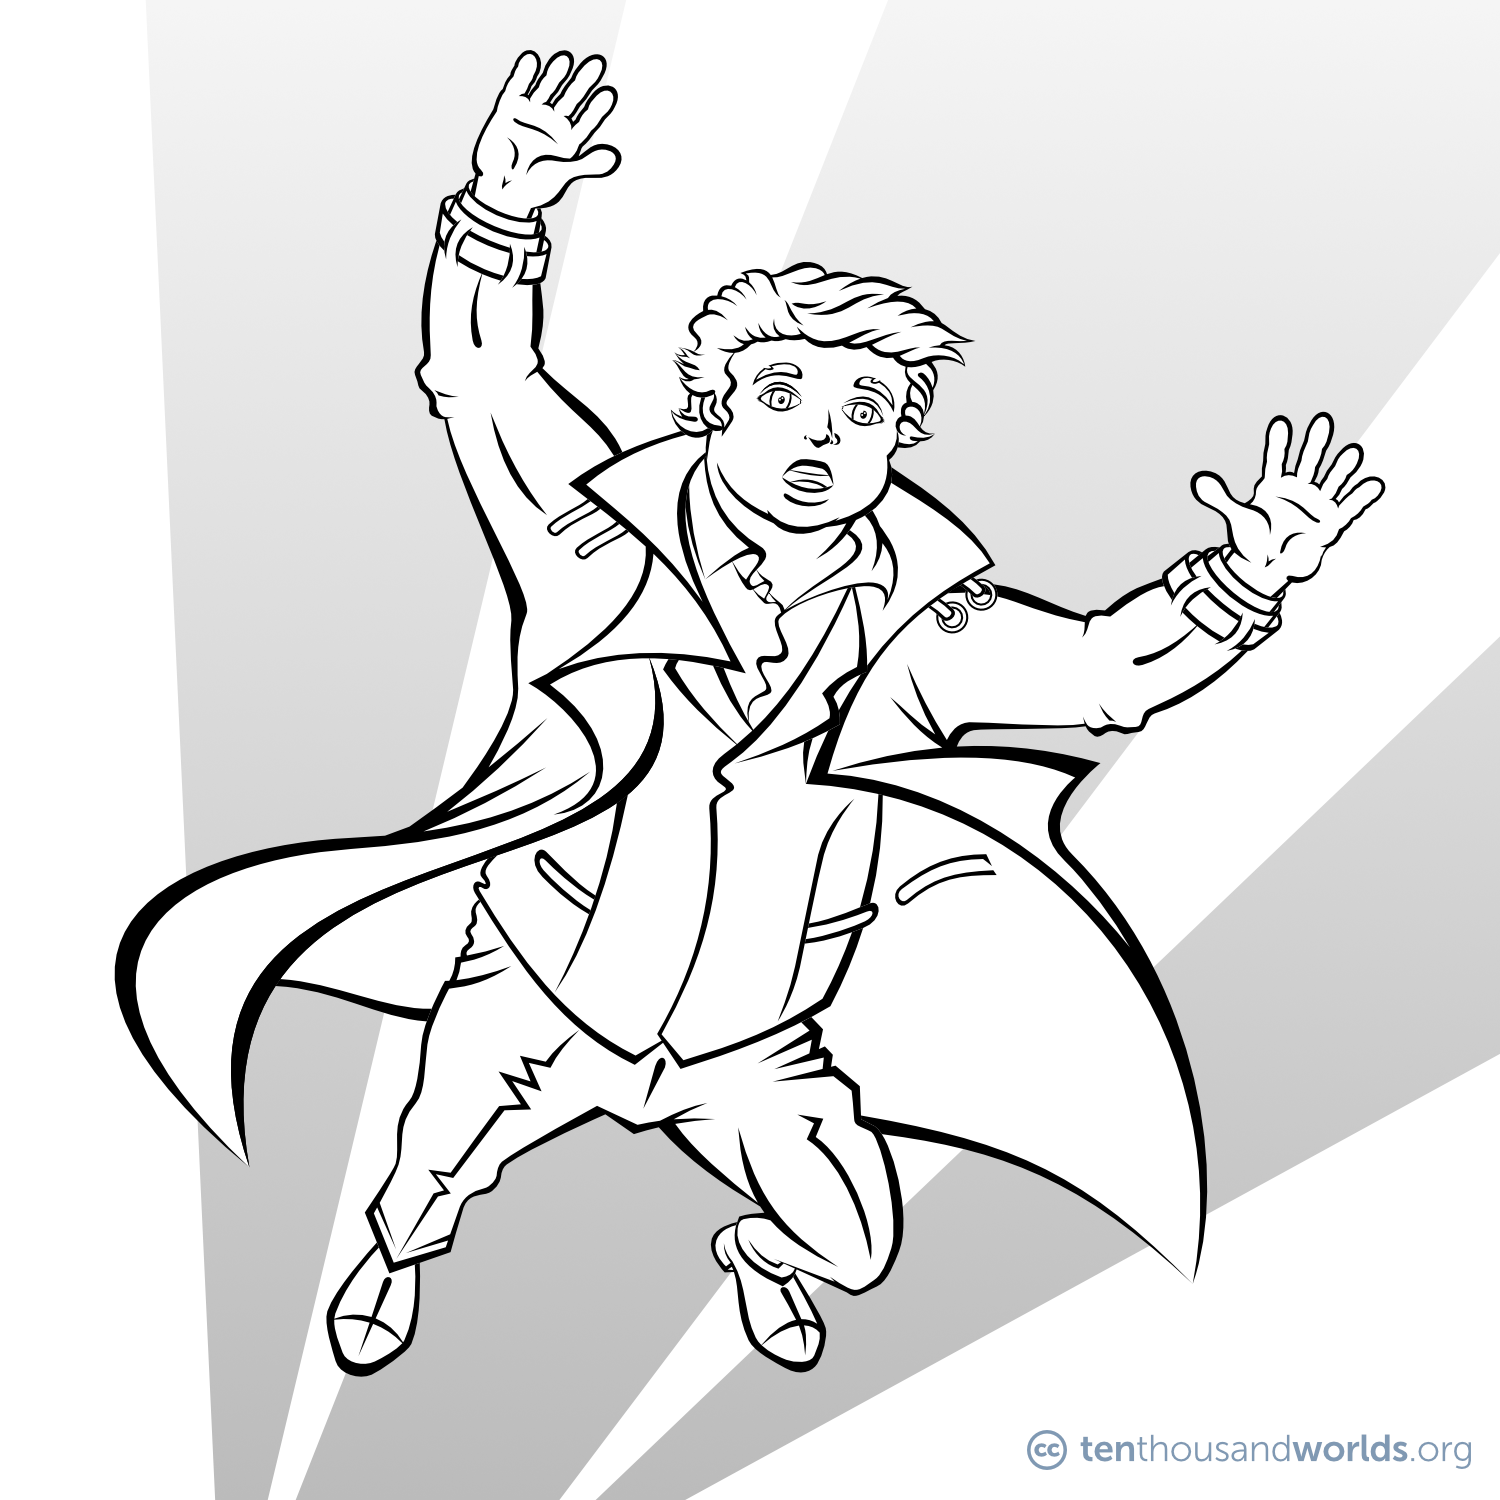 An ink outline of a chubby man wearing a large flapping coat while flying through the air.